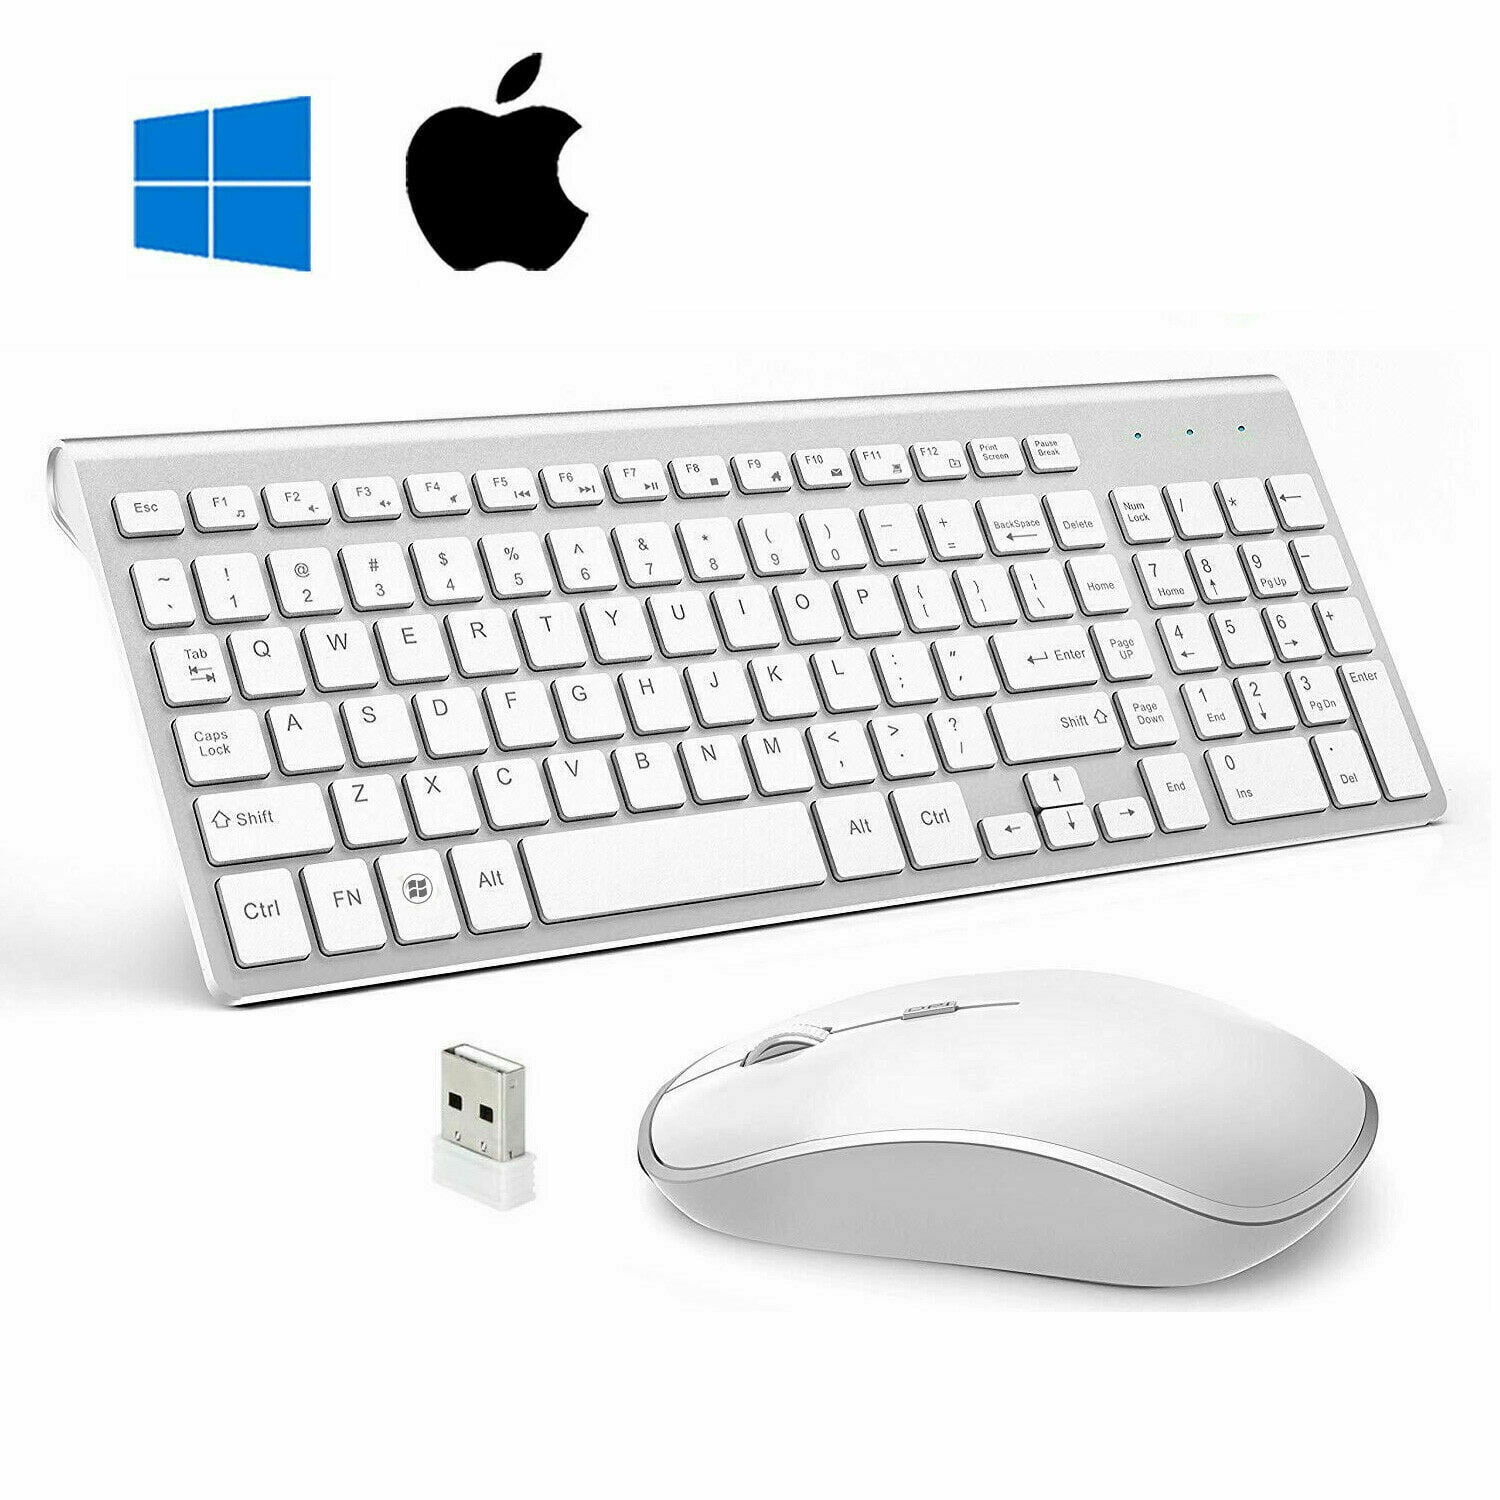 Wireless Keyboard And Mouse Combo Set 2.4G For Mac Apple Pc mini Size Slim USA 